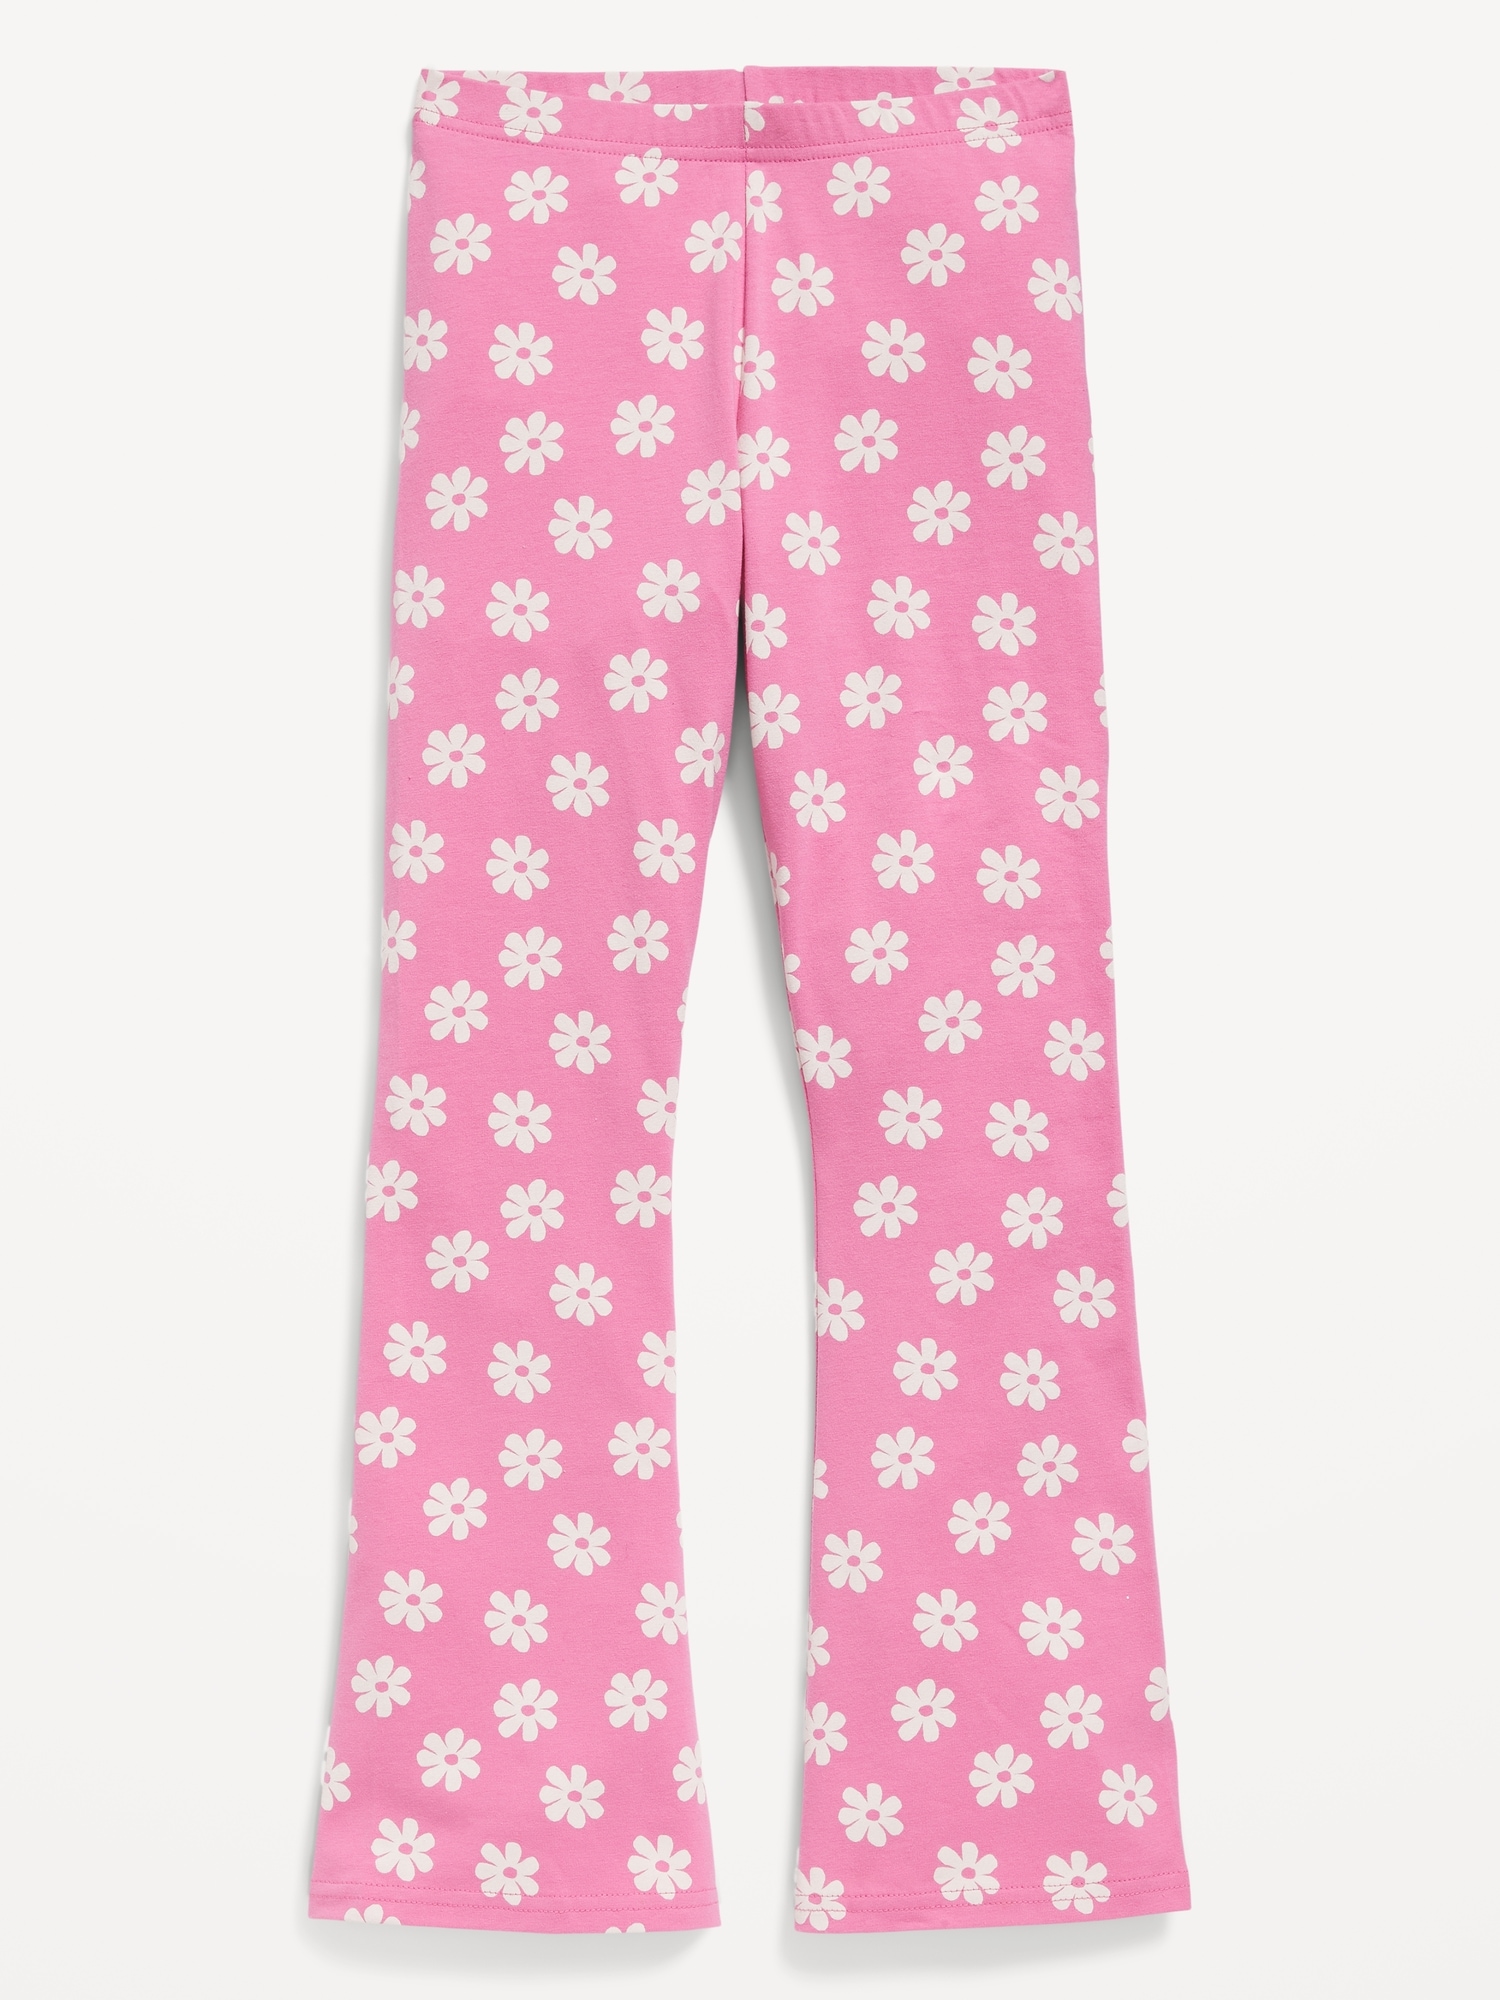 Old Navy Little Girls Flare Leggings, Girls 4-6x, Clothing & Accessories